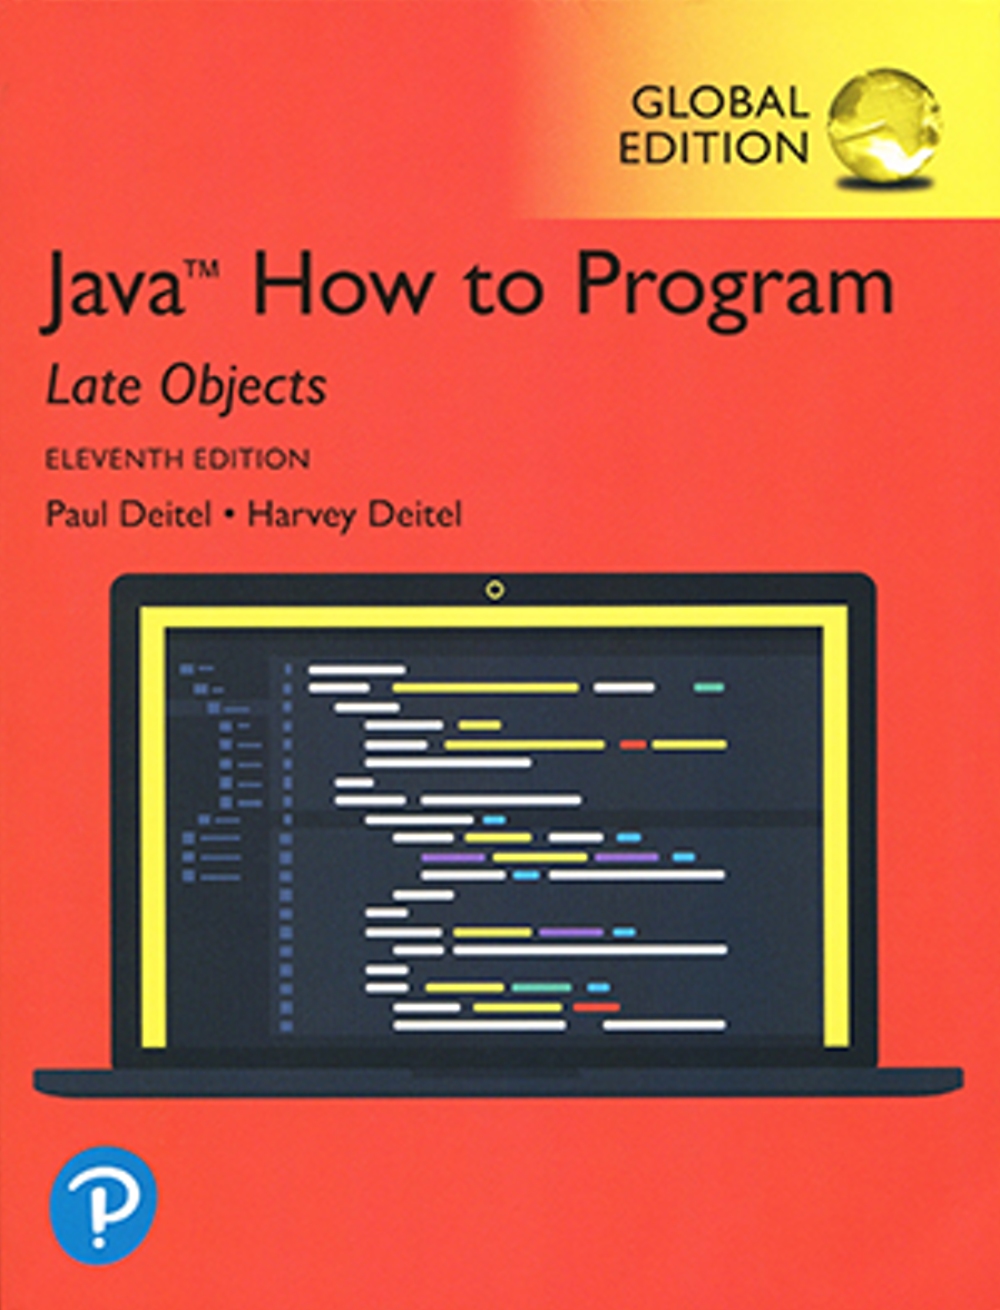 Java How to Program, Late Objects (GE)隨附帳號（11版）